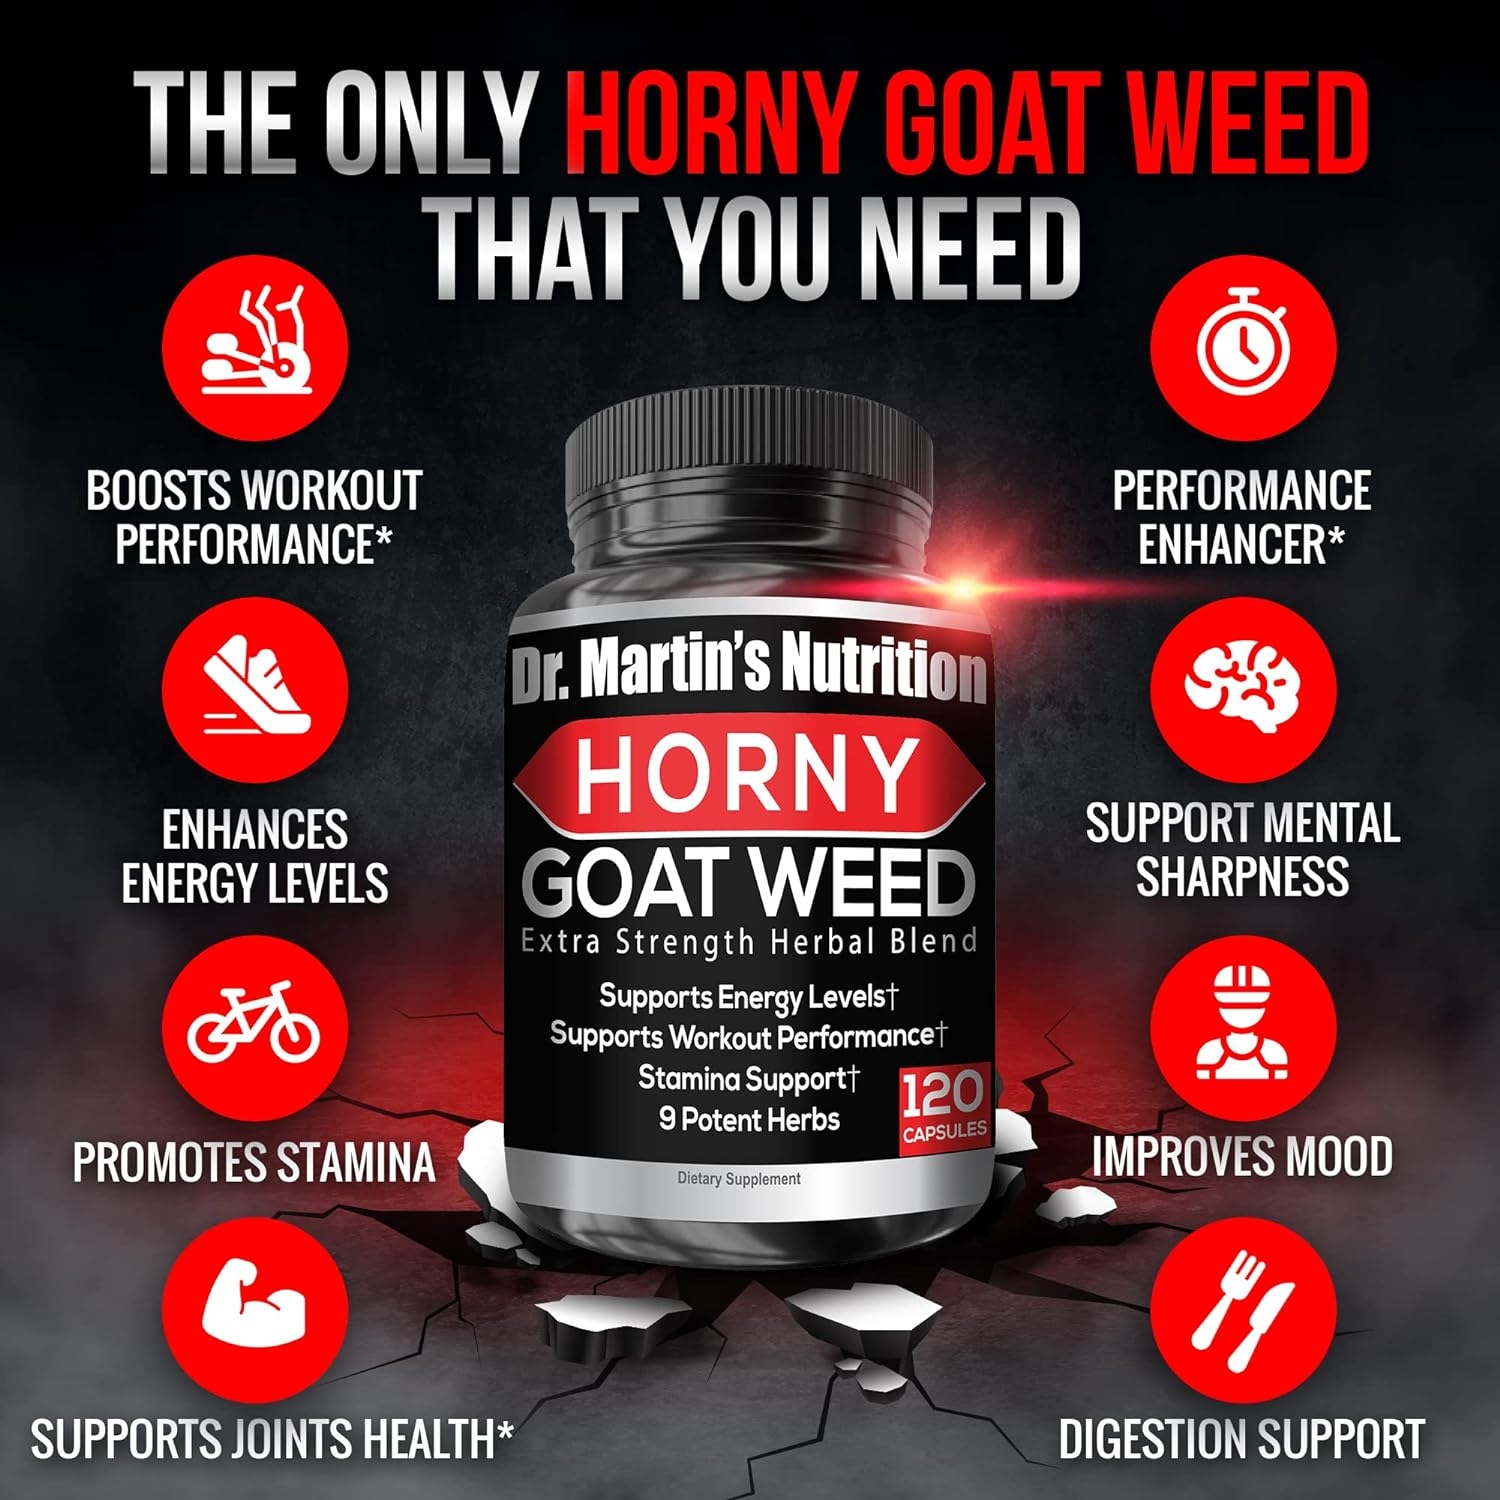 Super Strength 1590mg Horny Goat Weed 120 Capsules With Maca Arginine & Ginseng - Naturally Boost your Health, Workout Performance, Endurance & Energy, Joint Health For Men & Women (120C)